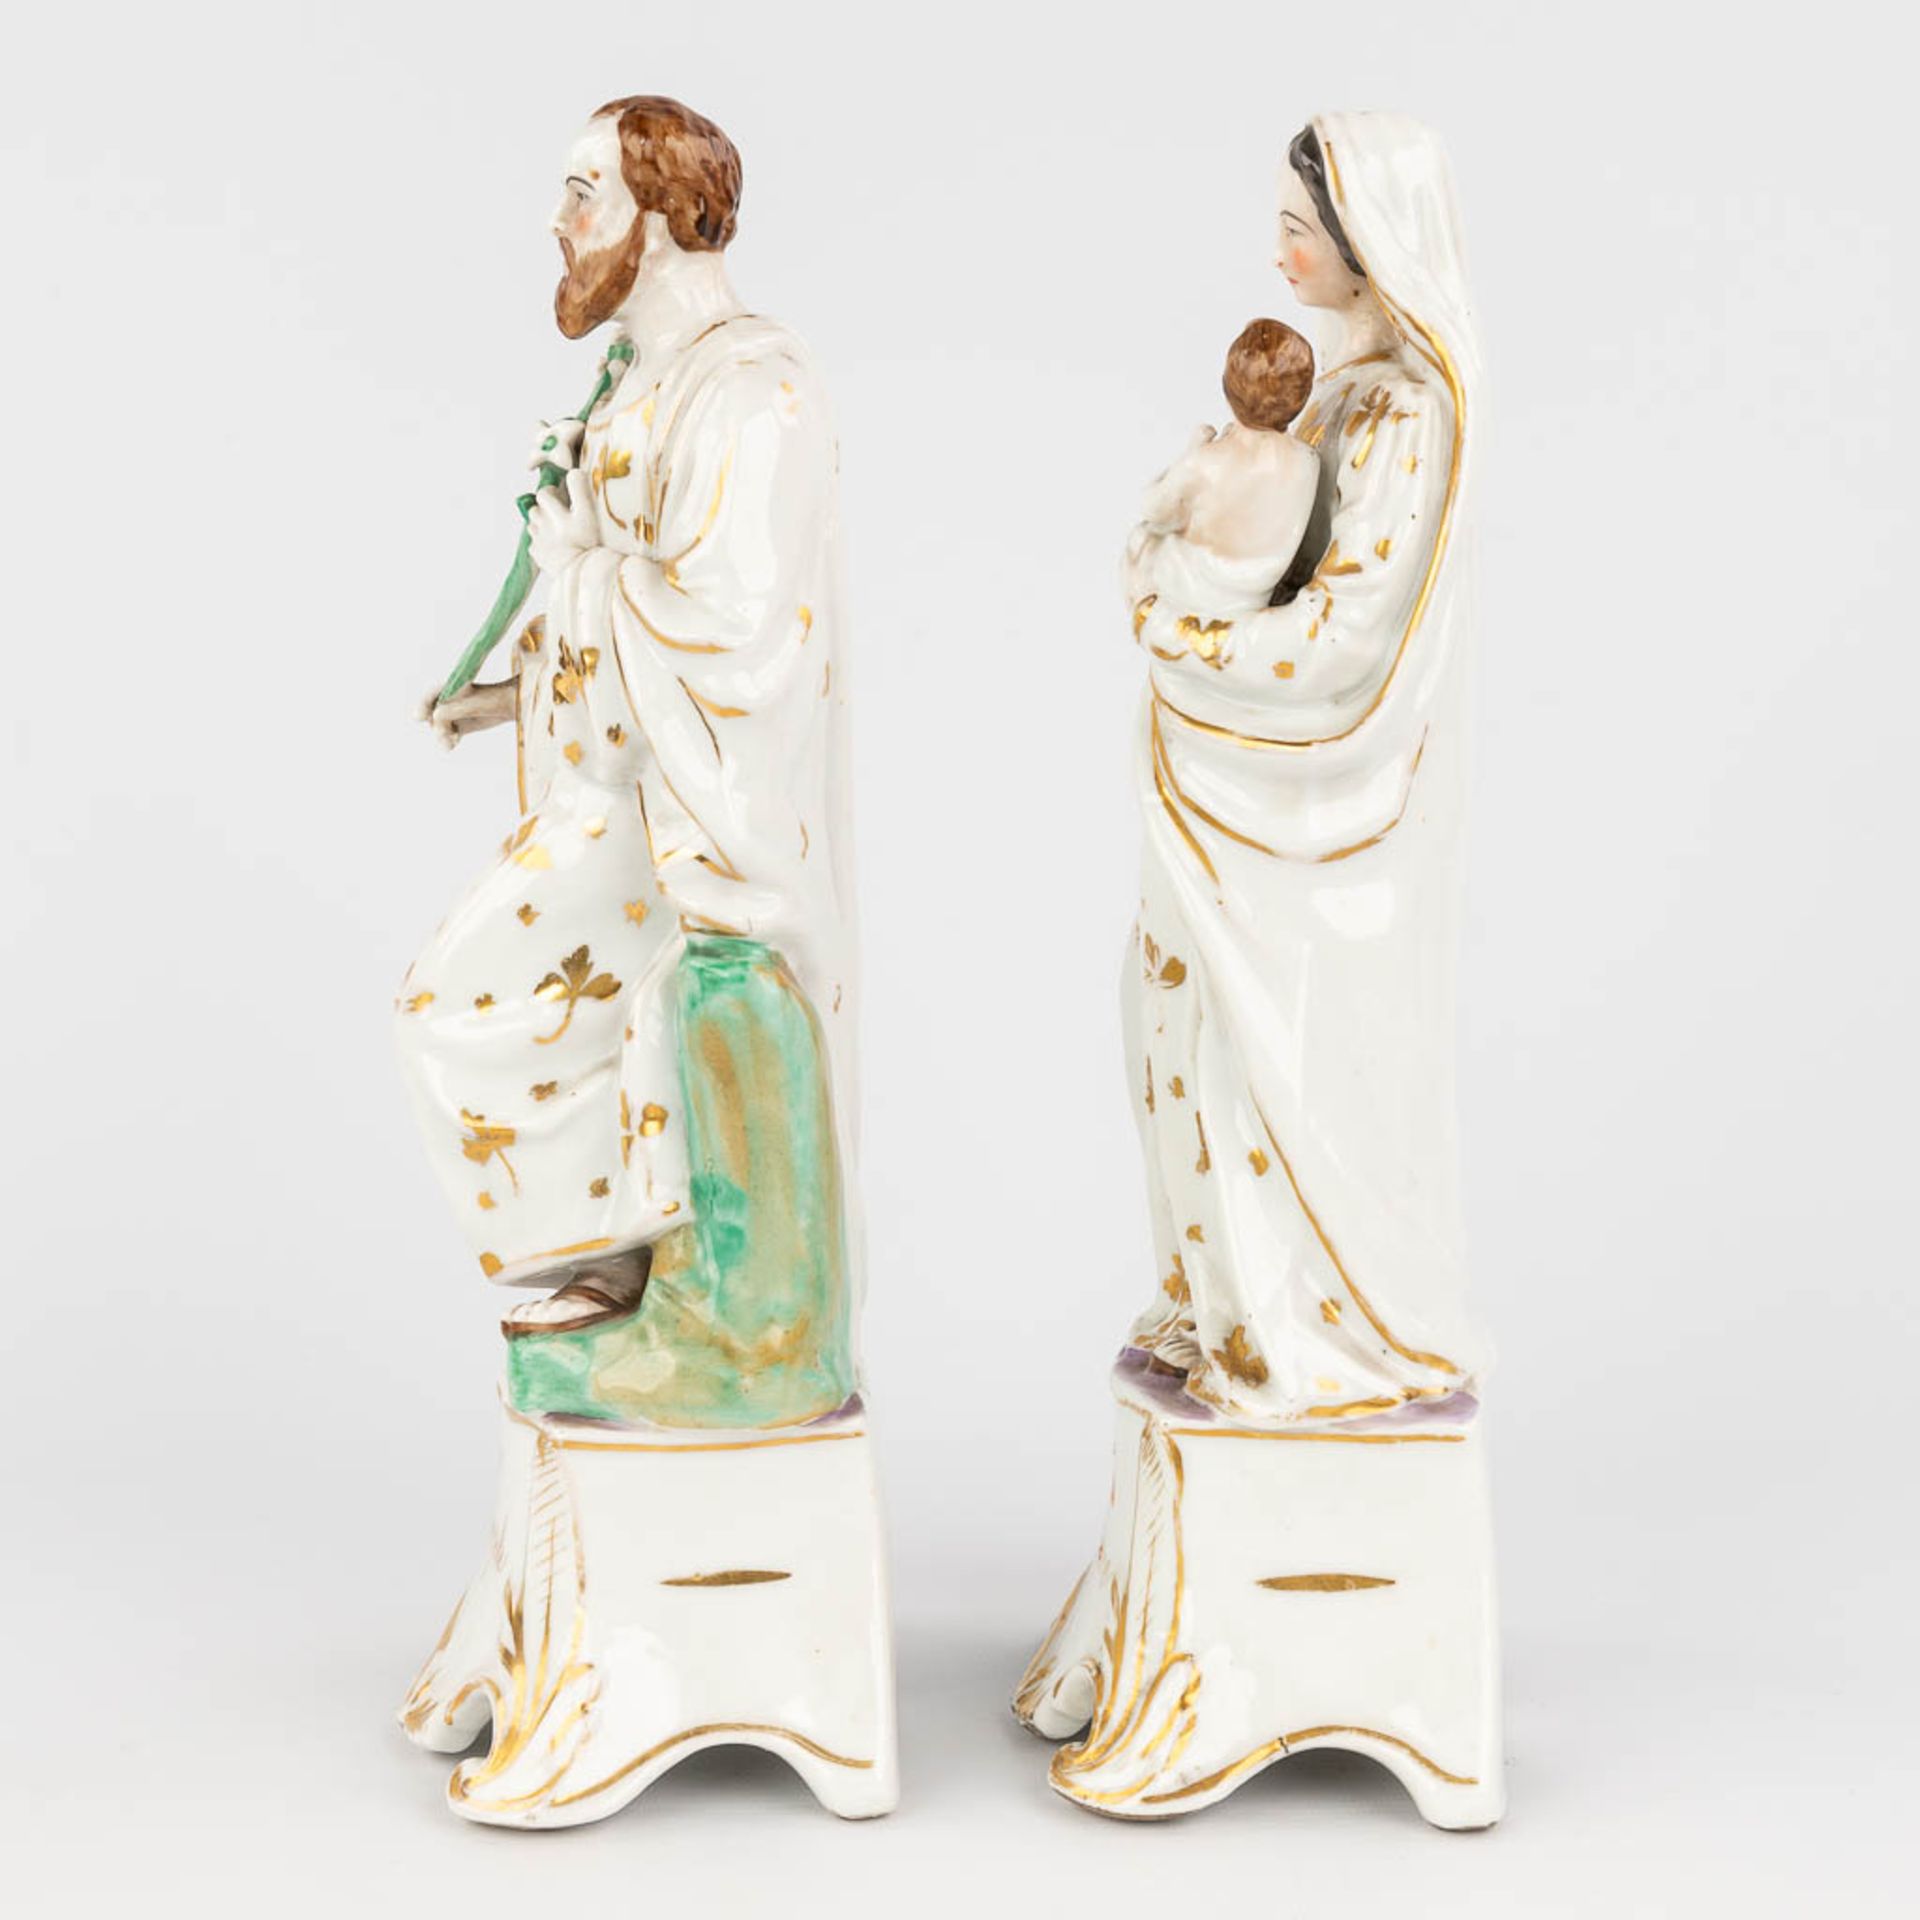 A porcelain figurine of Mary and Joseph, made in Andenne, Belgium. (H: 32 cm) - Image 6 of 13